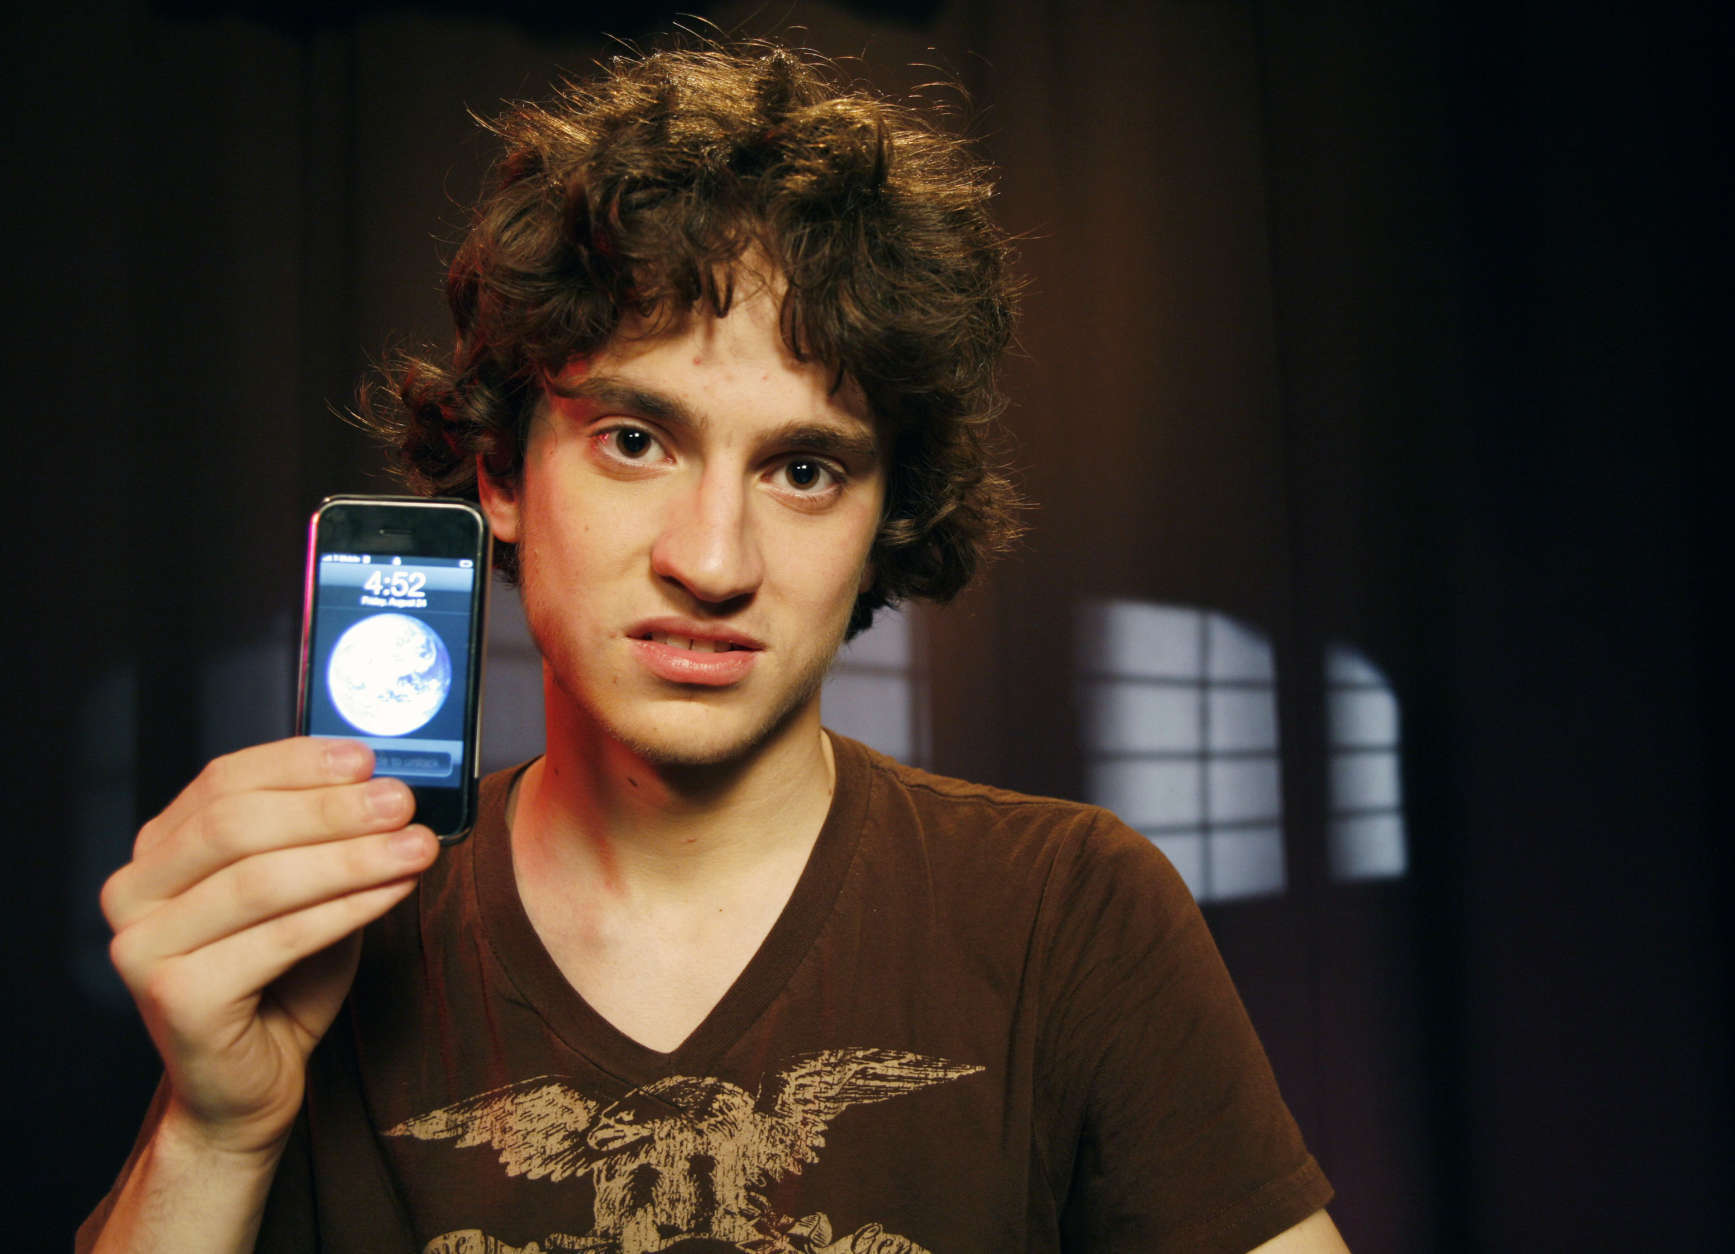 George Hotz, 17, holds an iPhone that he has unlocked and is using on T-Mobile's network, Friday, Aug. 24, 2007 in New York. Hotz has broken the lock that ties Apple's iPhone to AT&amp;T's wireless network, freeing the most hyped cell phone ever for use on the networks of other carriers, including overseas ones. (AP Photo/Jeff Christensen)